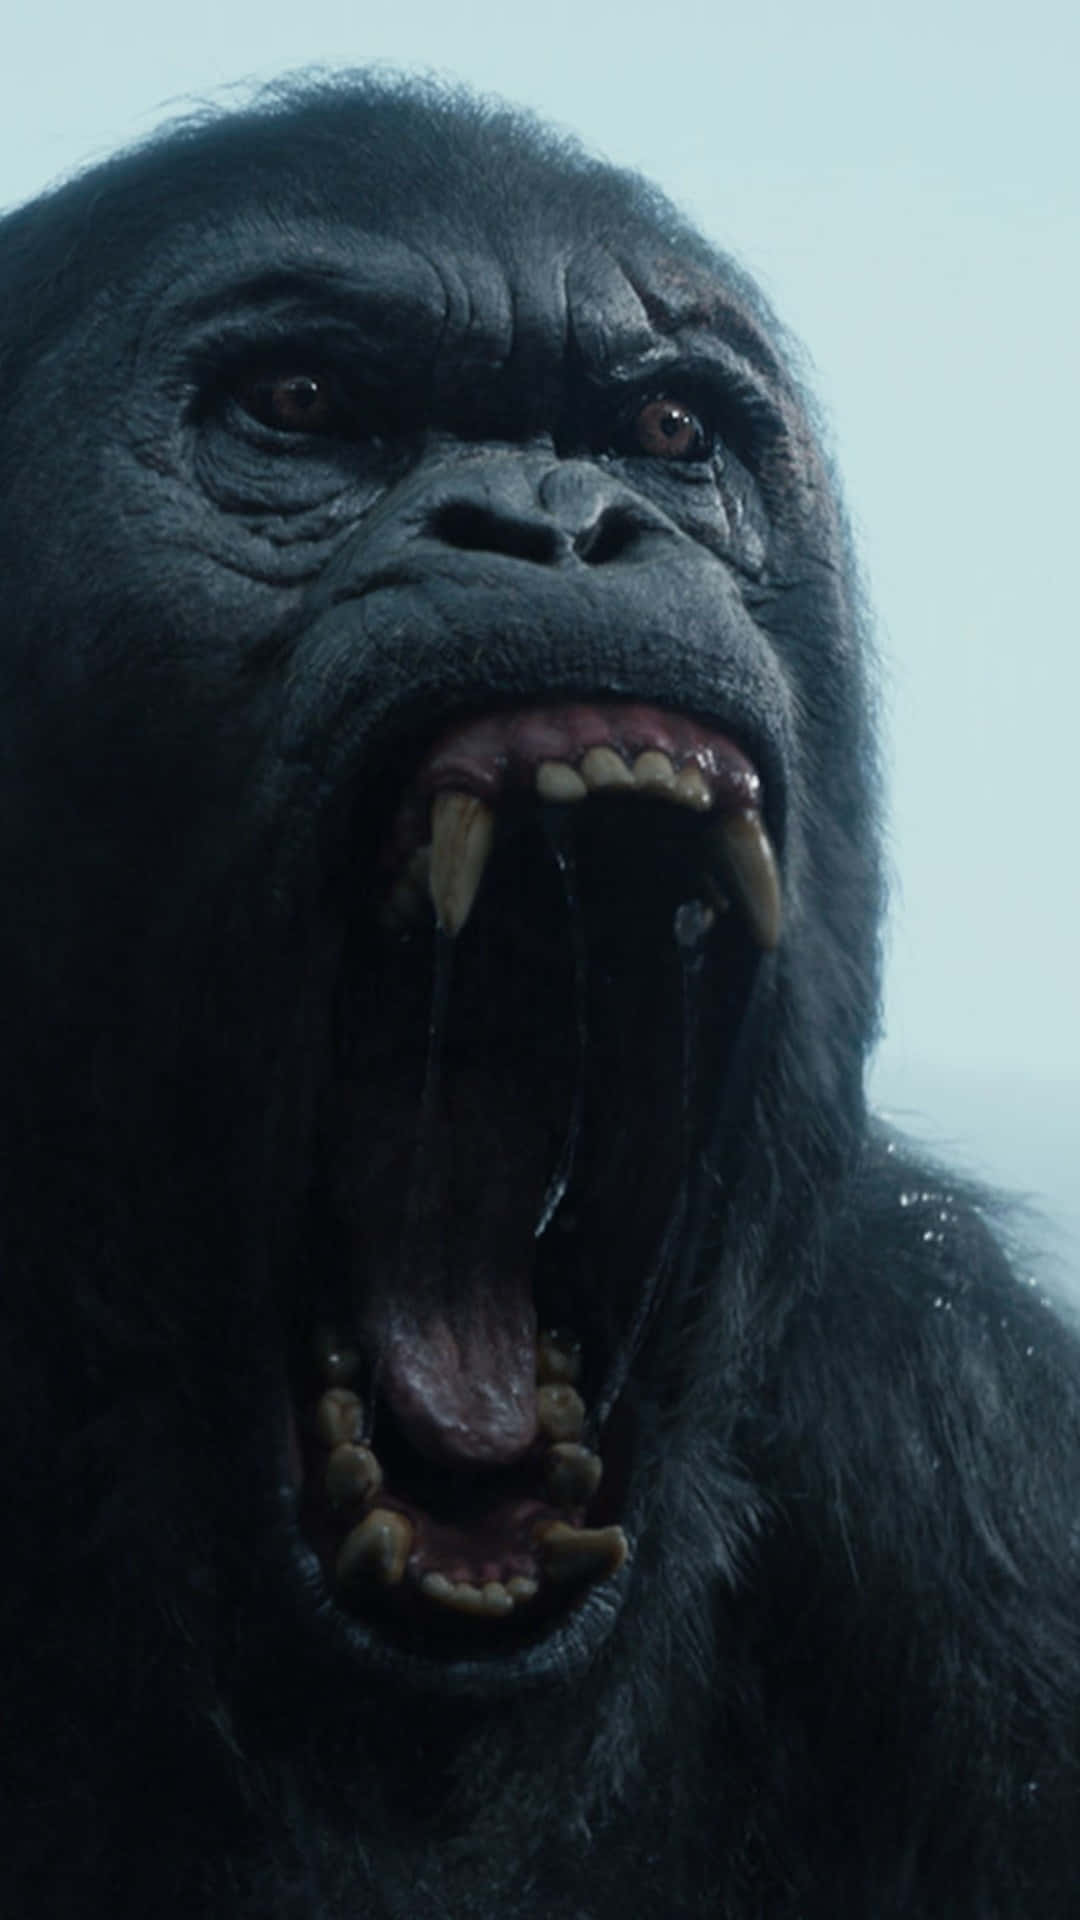 "Why Best Gorilla is the King of the Jungle"